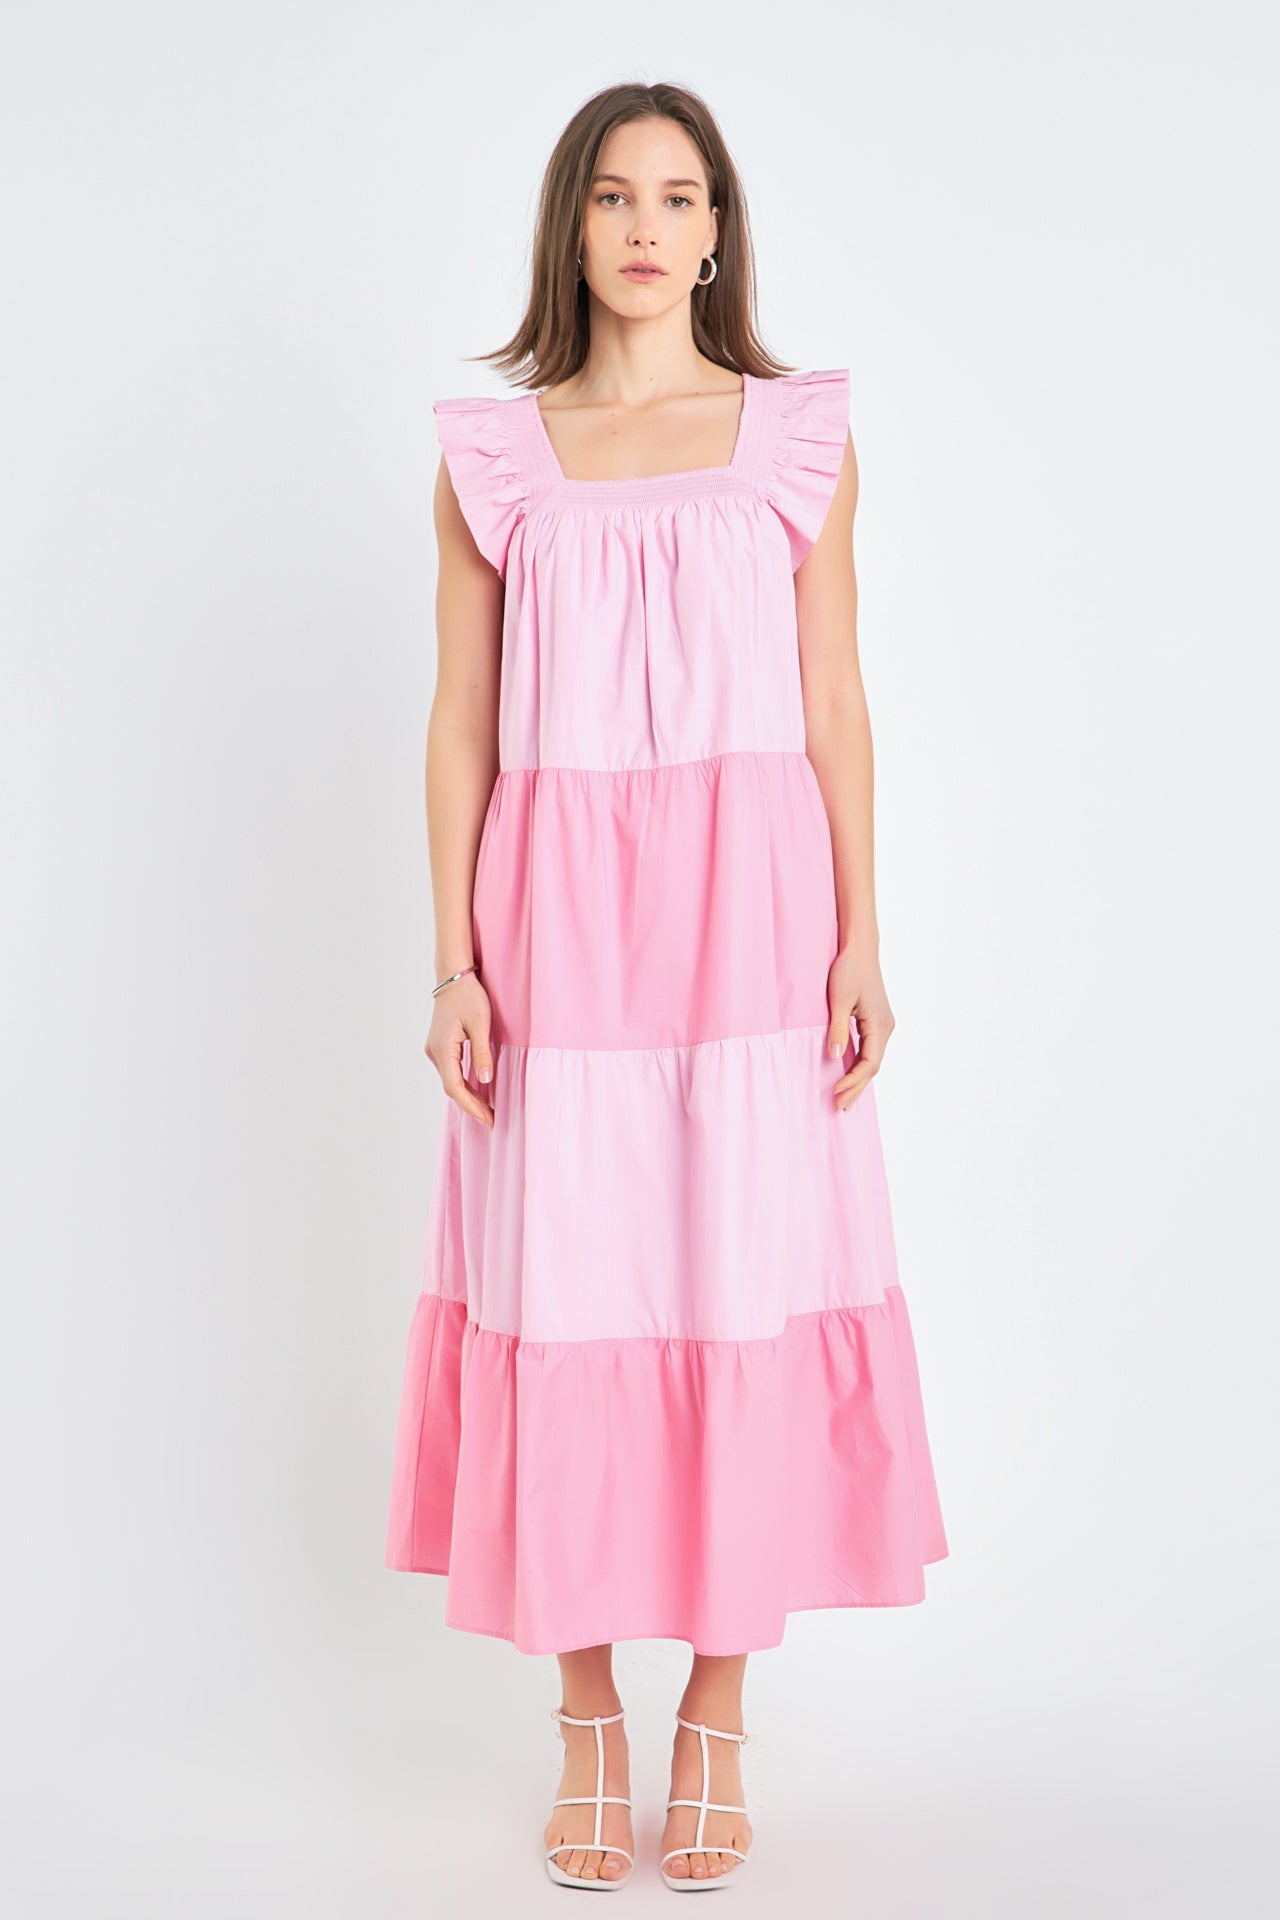 ENGLISH FACTORY - Ruffle Detail Colorblock Midi Dress - DRESSES available at Objectrare